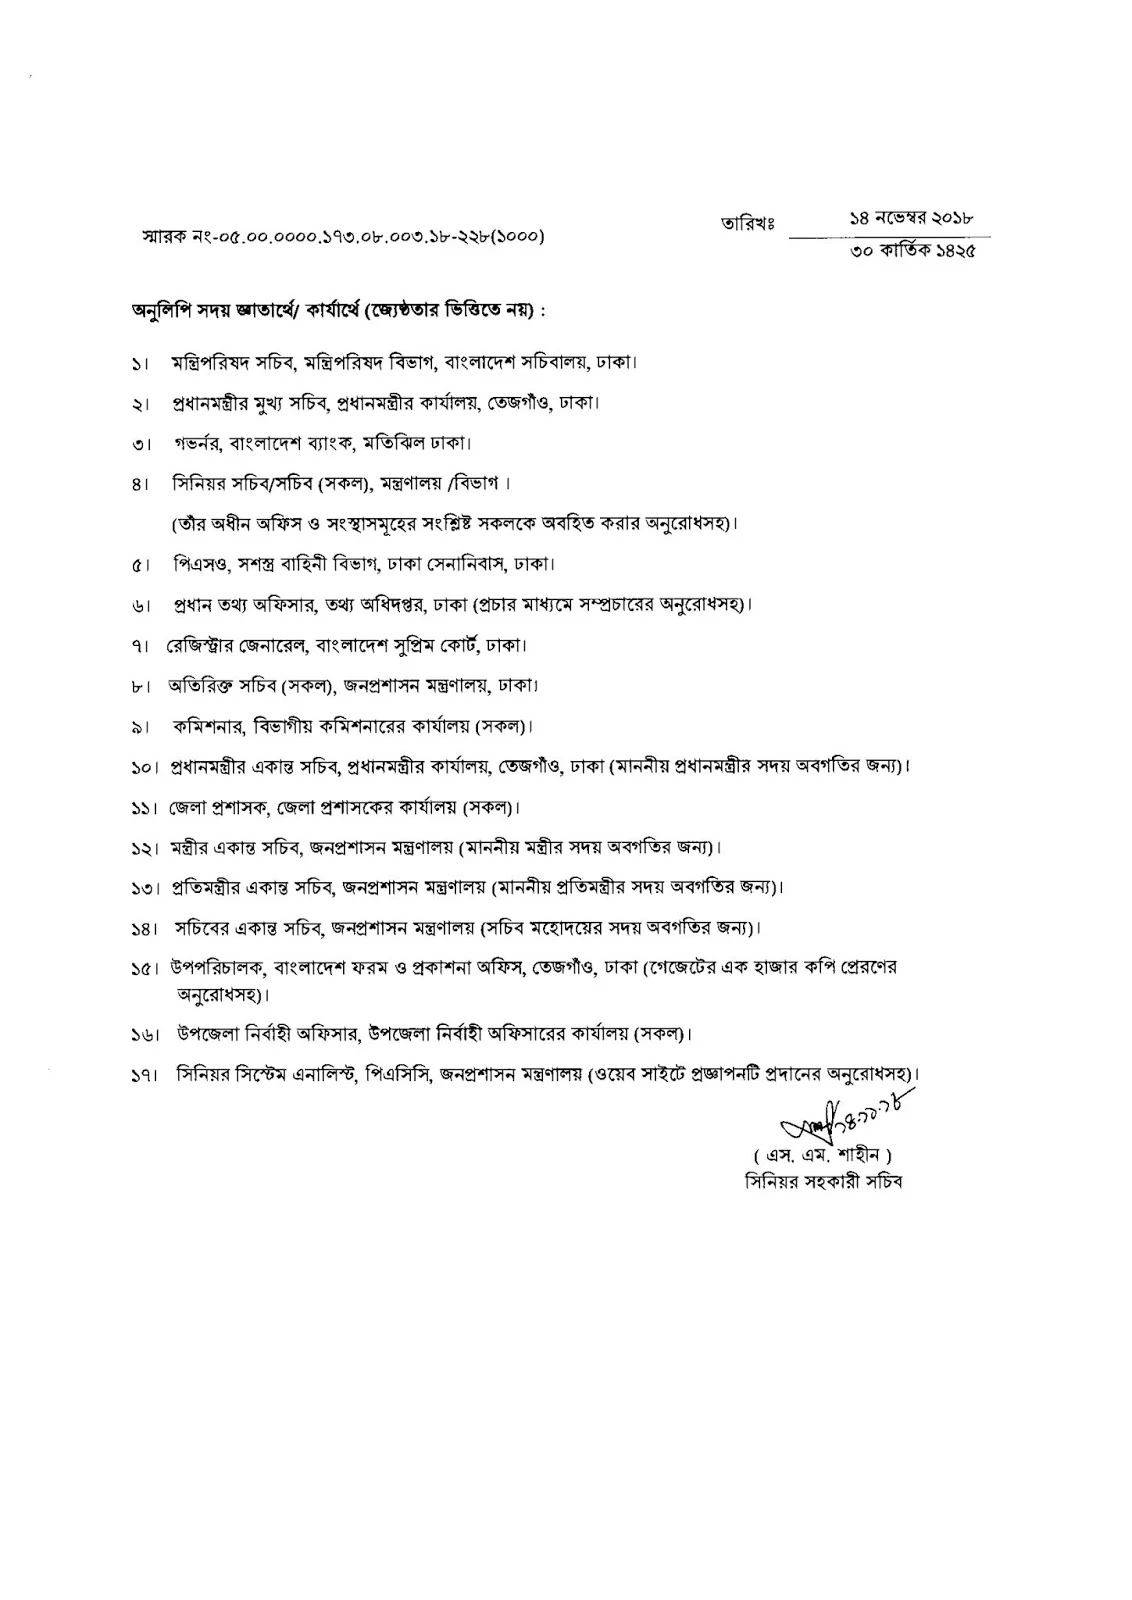 Government of the People's Republic of Bangladesh  2019 holidays list